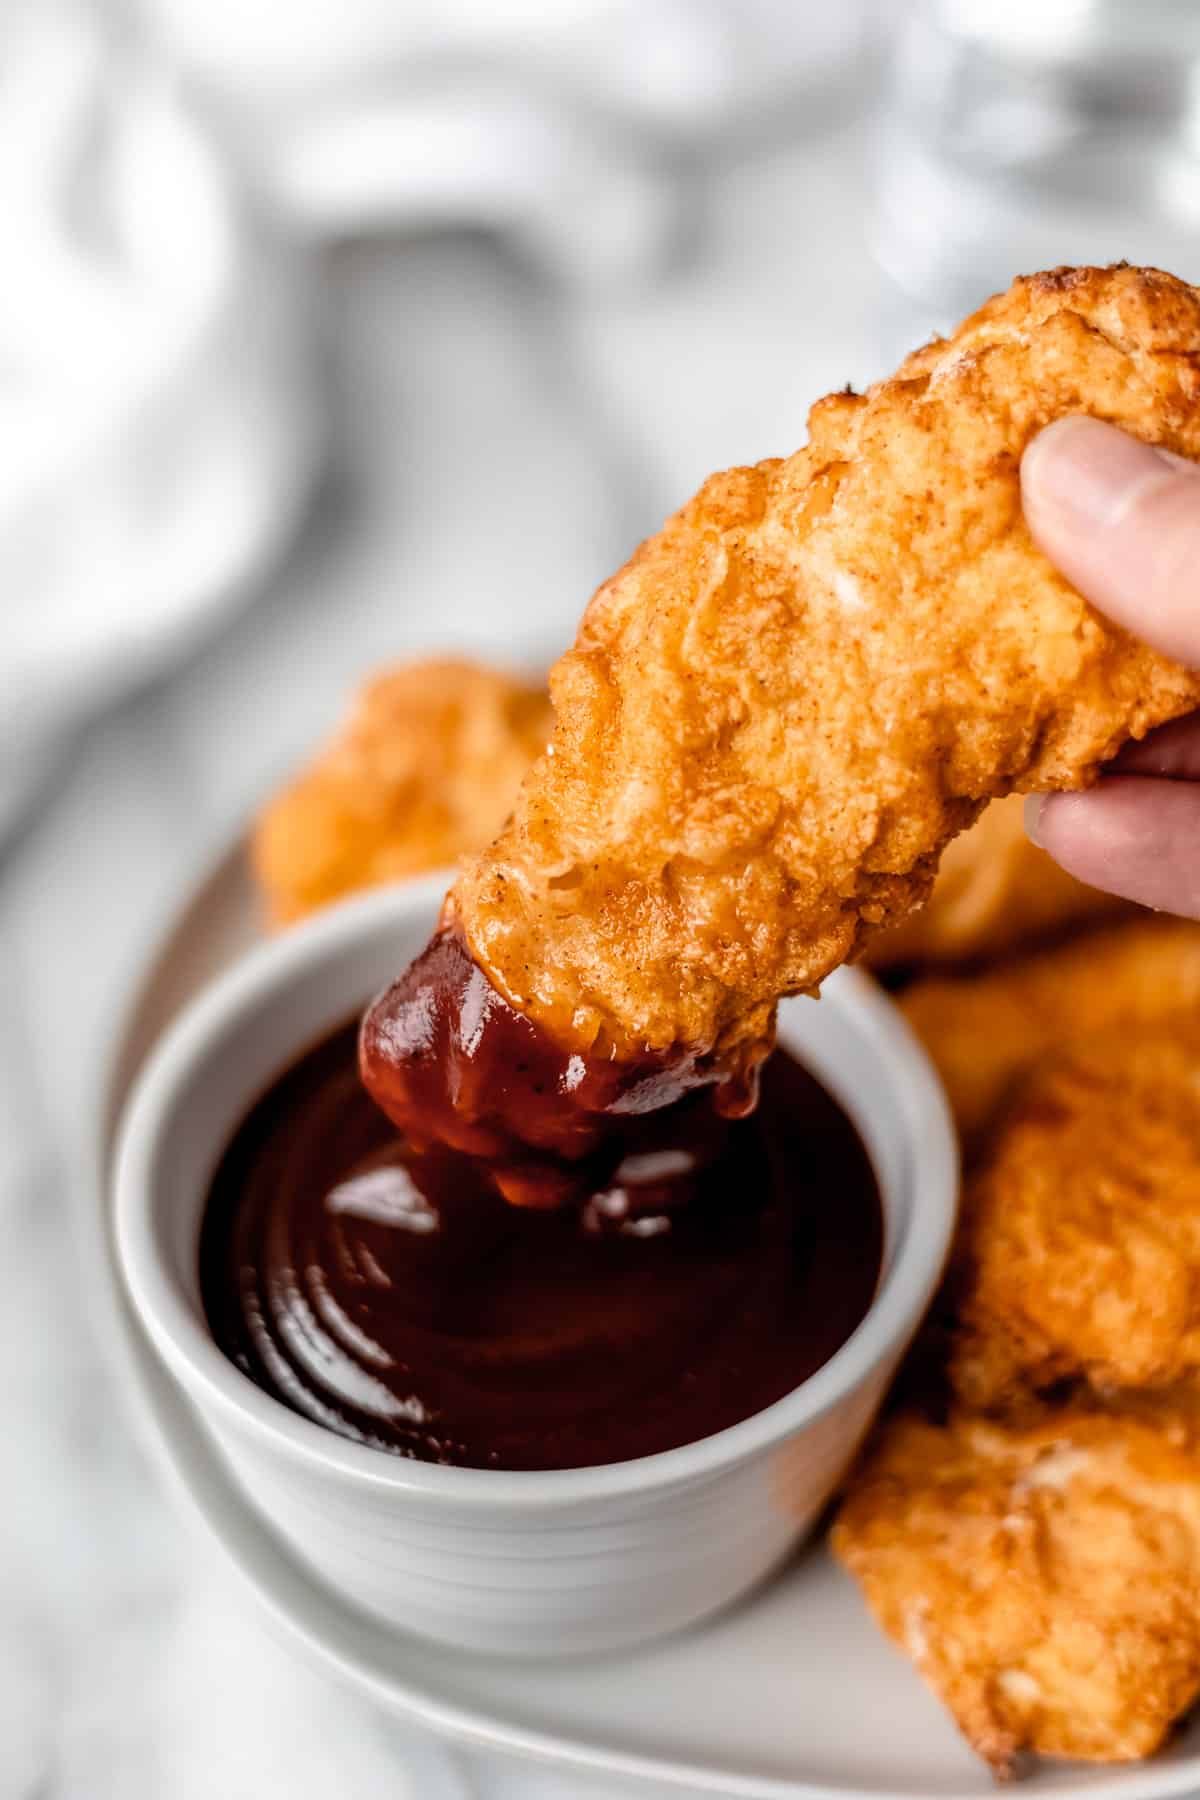 A chicken tender with barbecue sauce on one end being held up over the bowl of sauce.